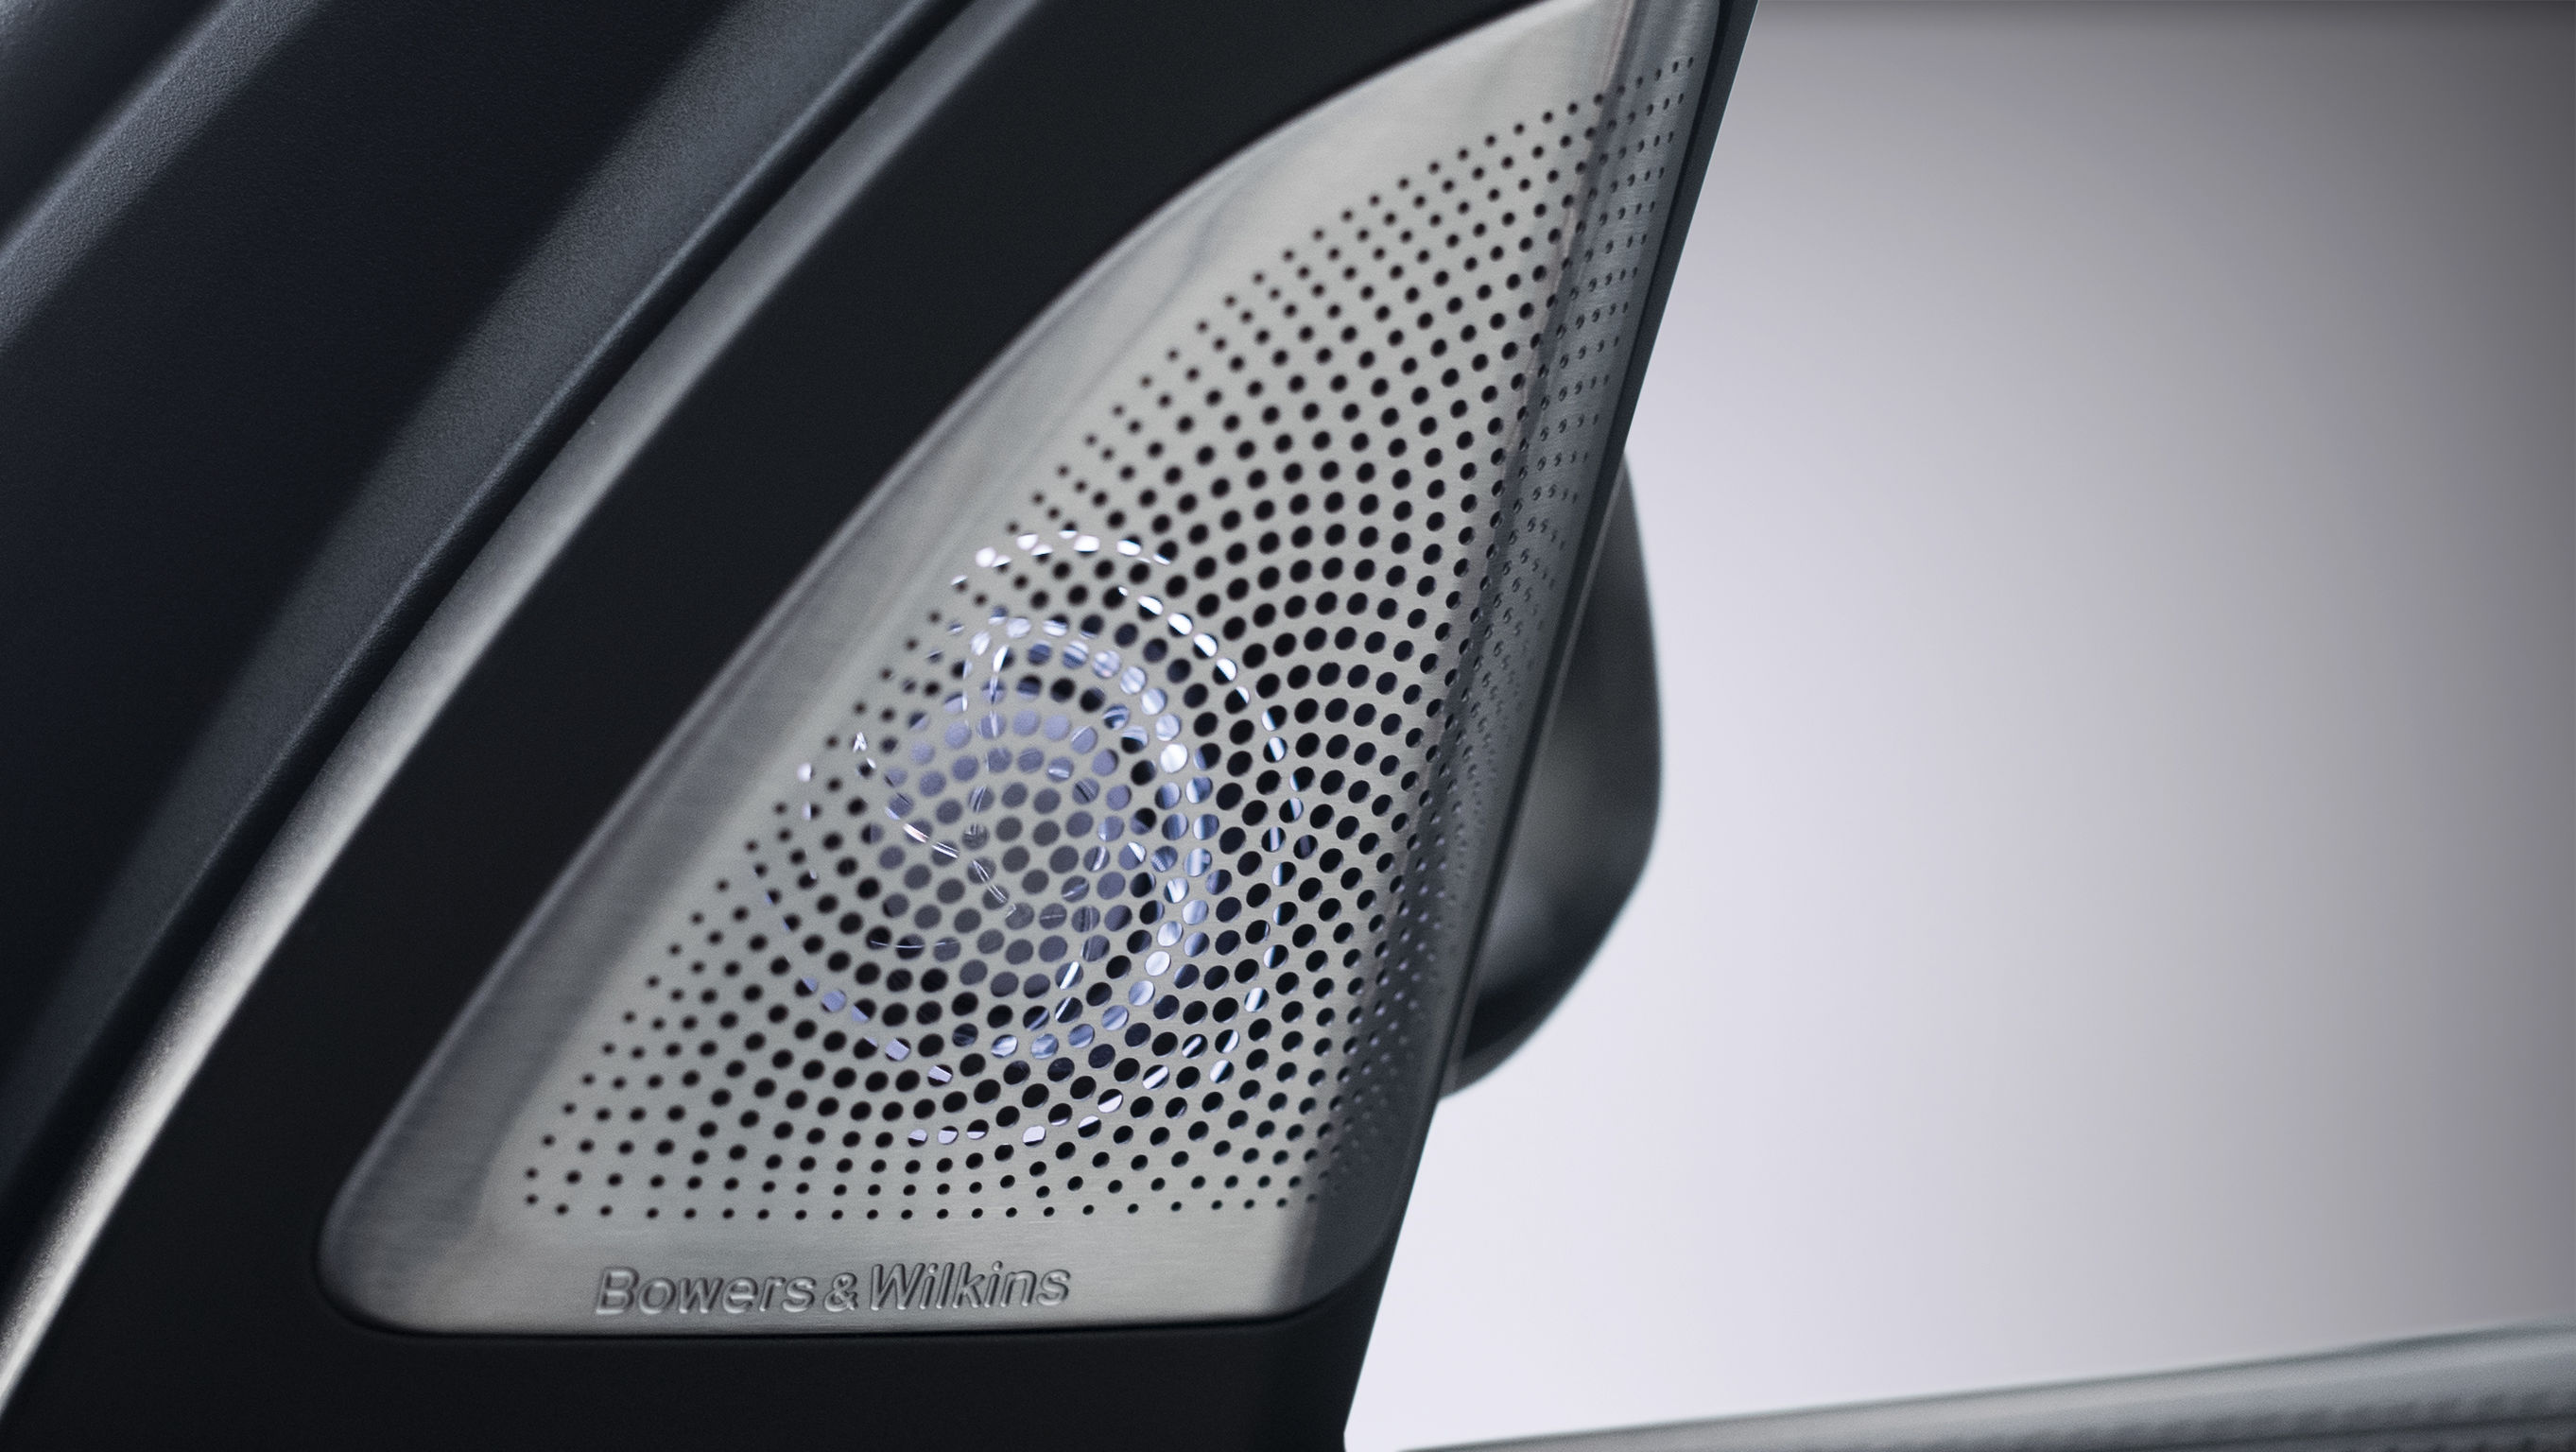 bowers and wilkins car stereo